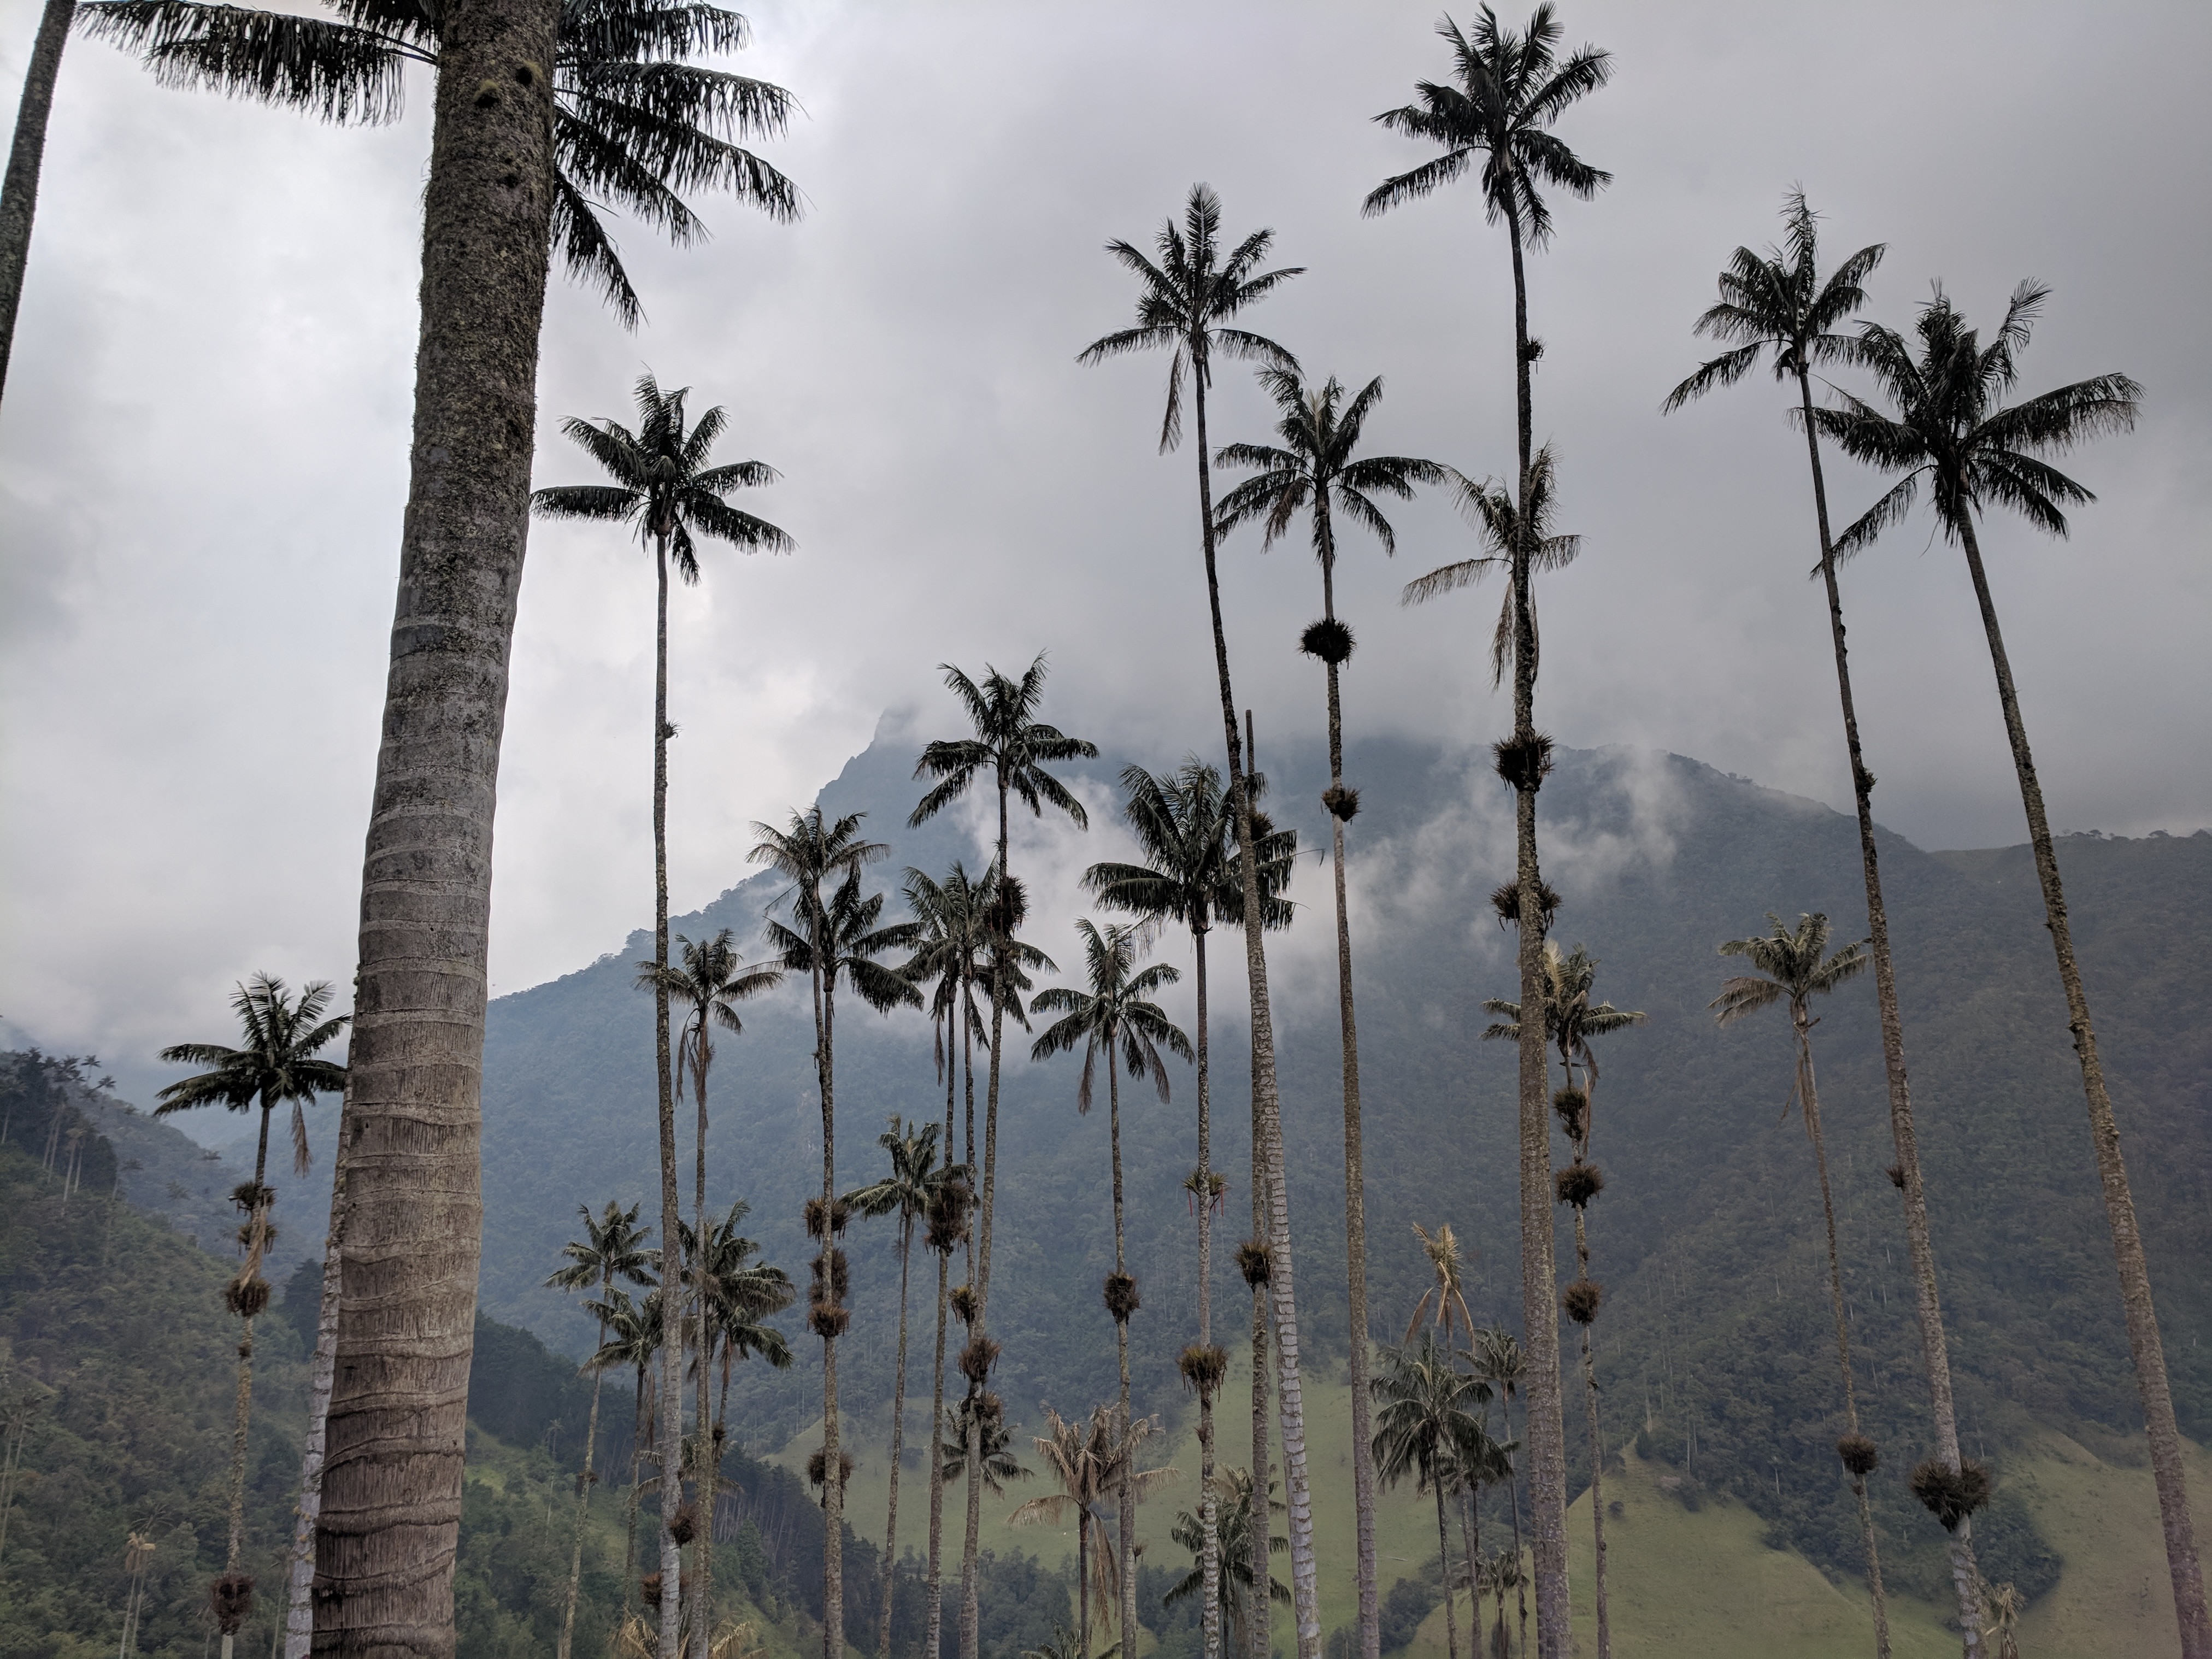 Hiking the Cocora Valley in Colombia